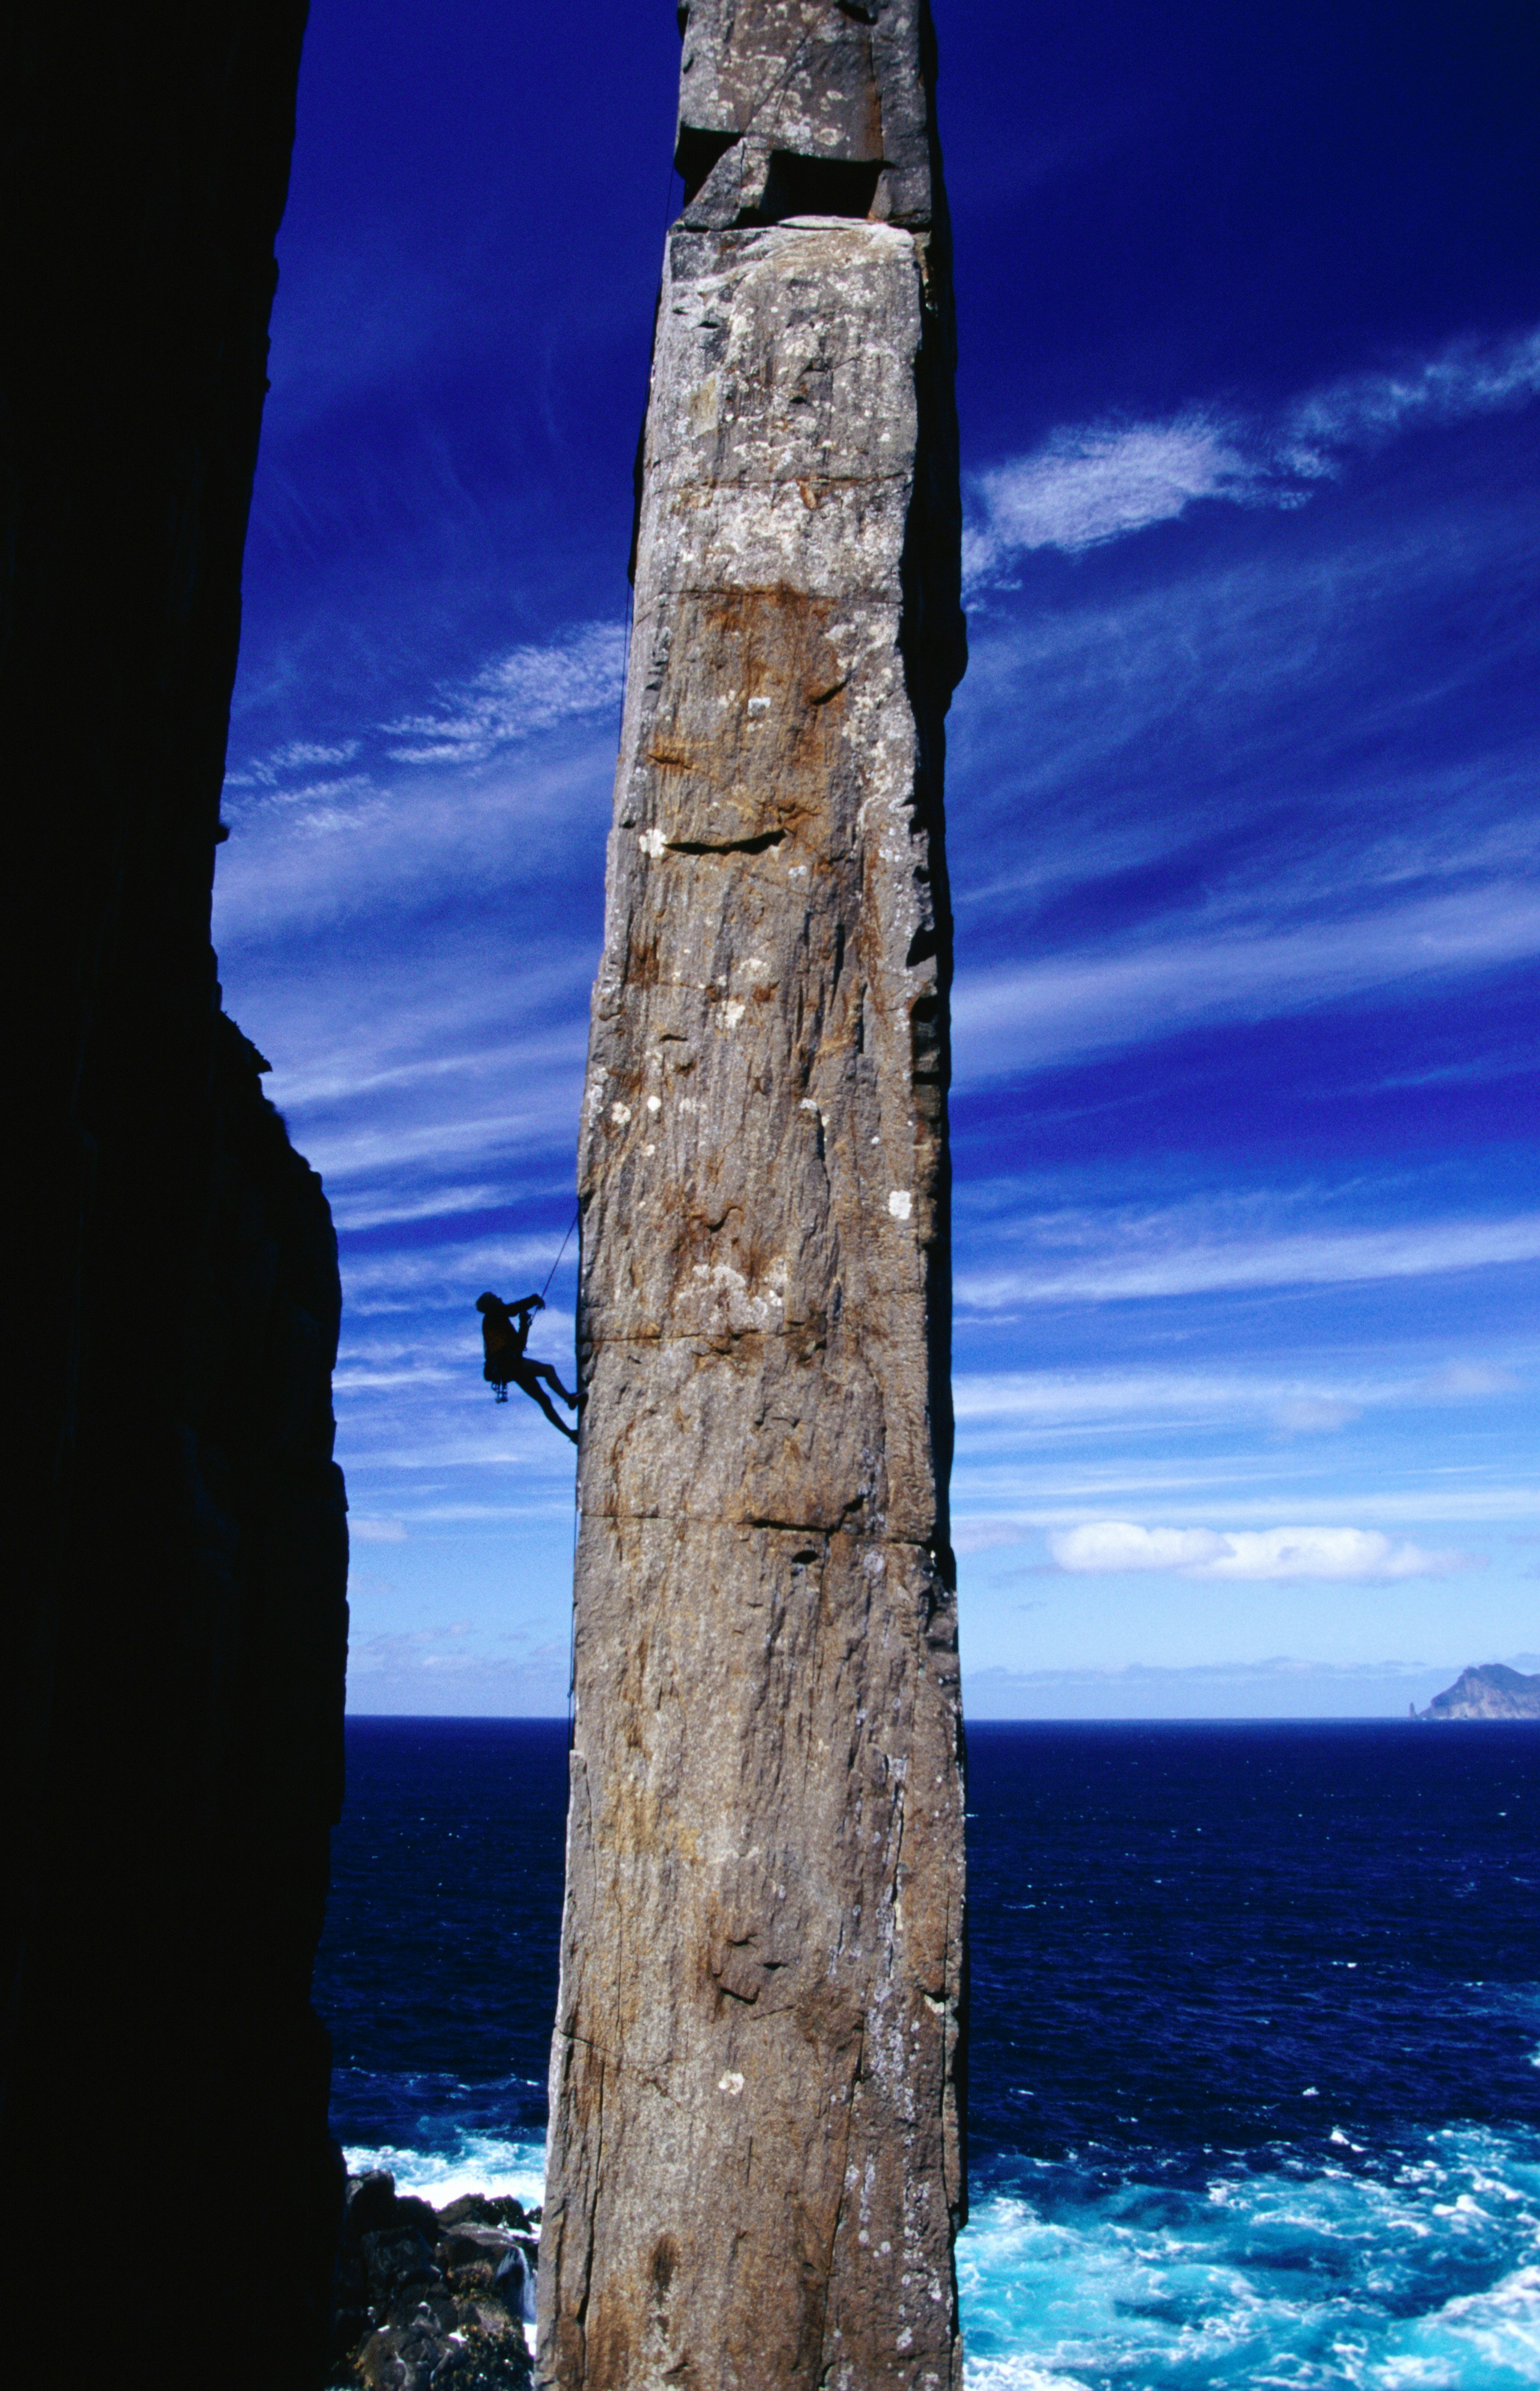 A narrow, rectangular spire of granite - known as the 'Totem Pole' rises up from the ocean into a blue sky streaked with wispy clouds; hanging from its side, and dwarfed by its size is a rock climber.